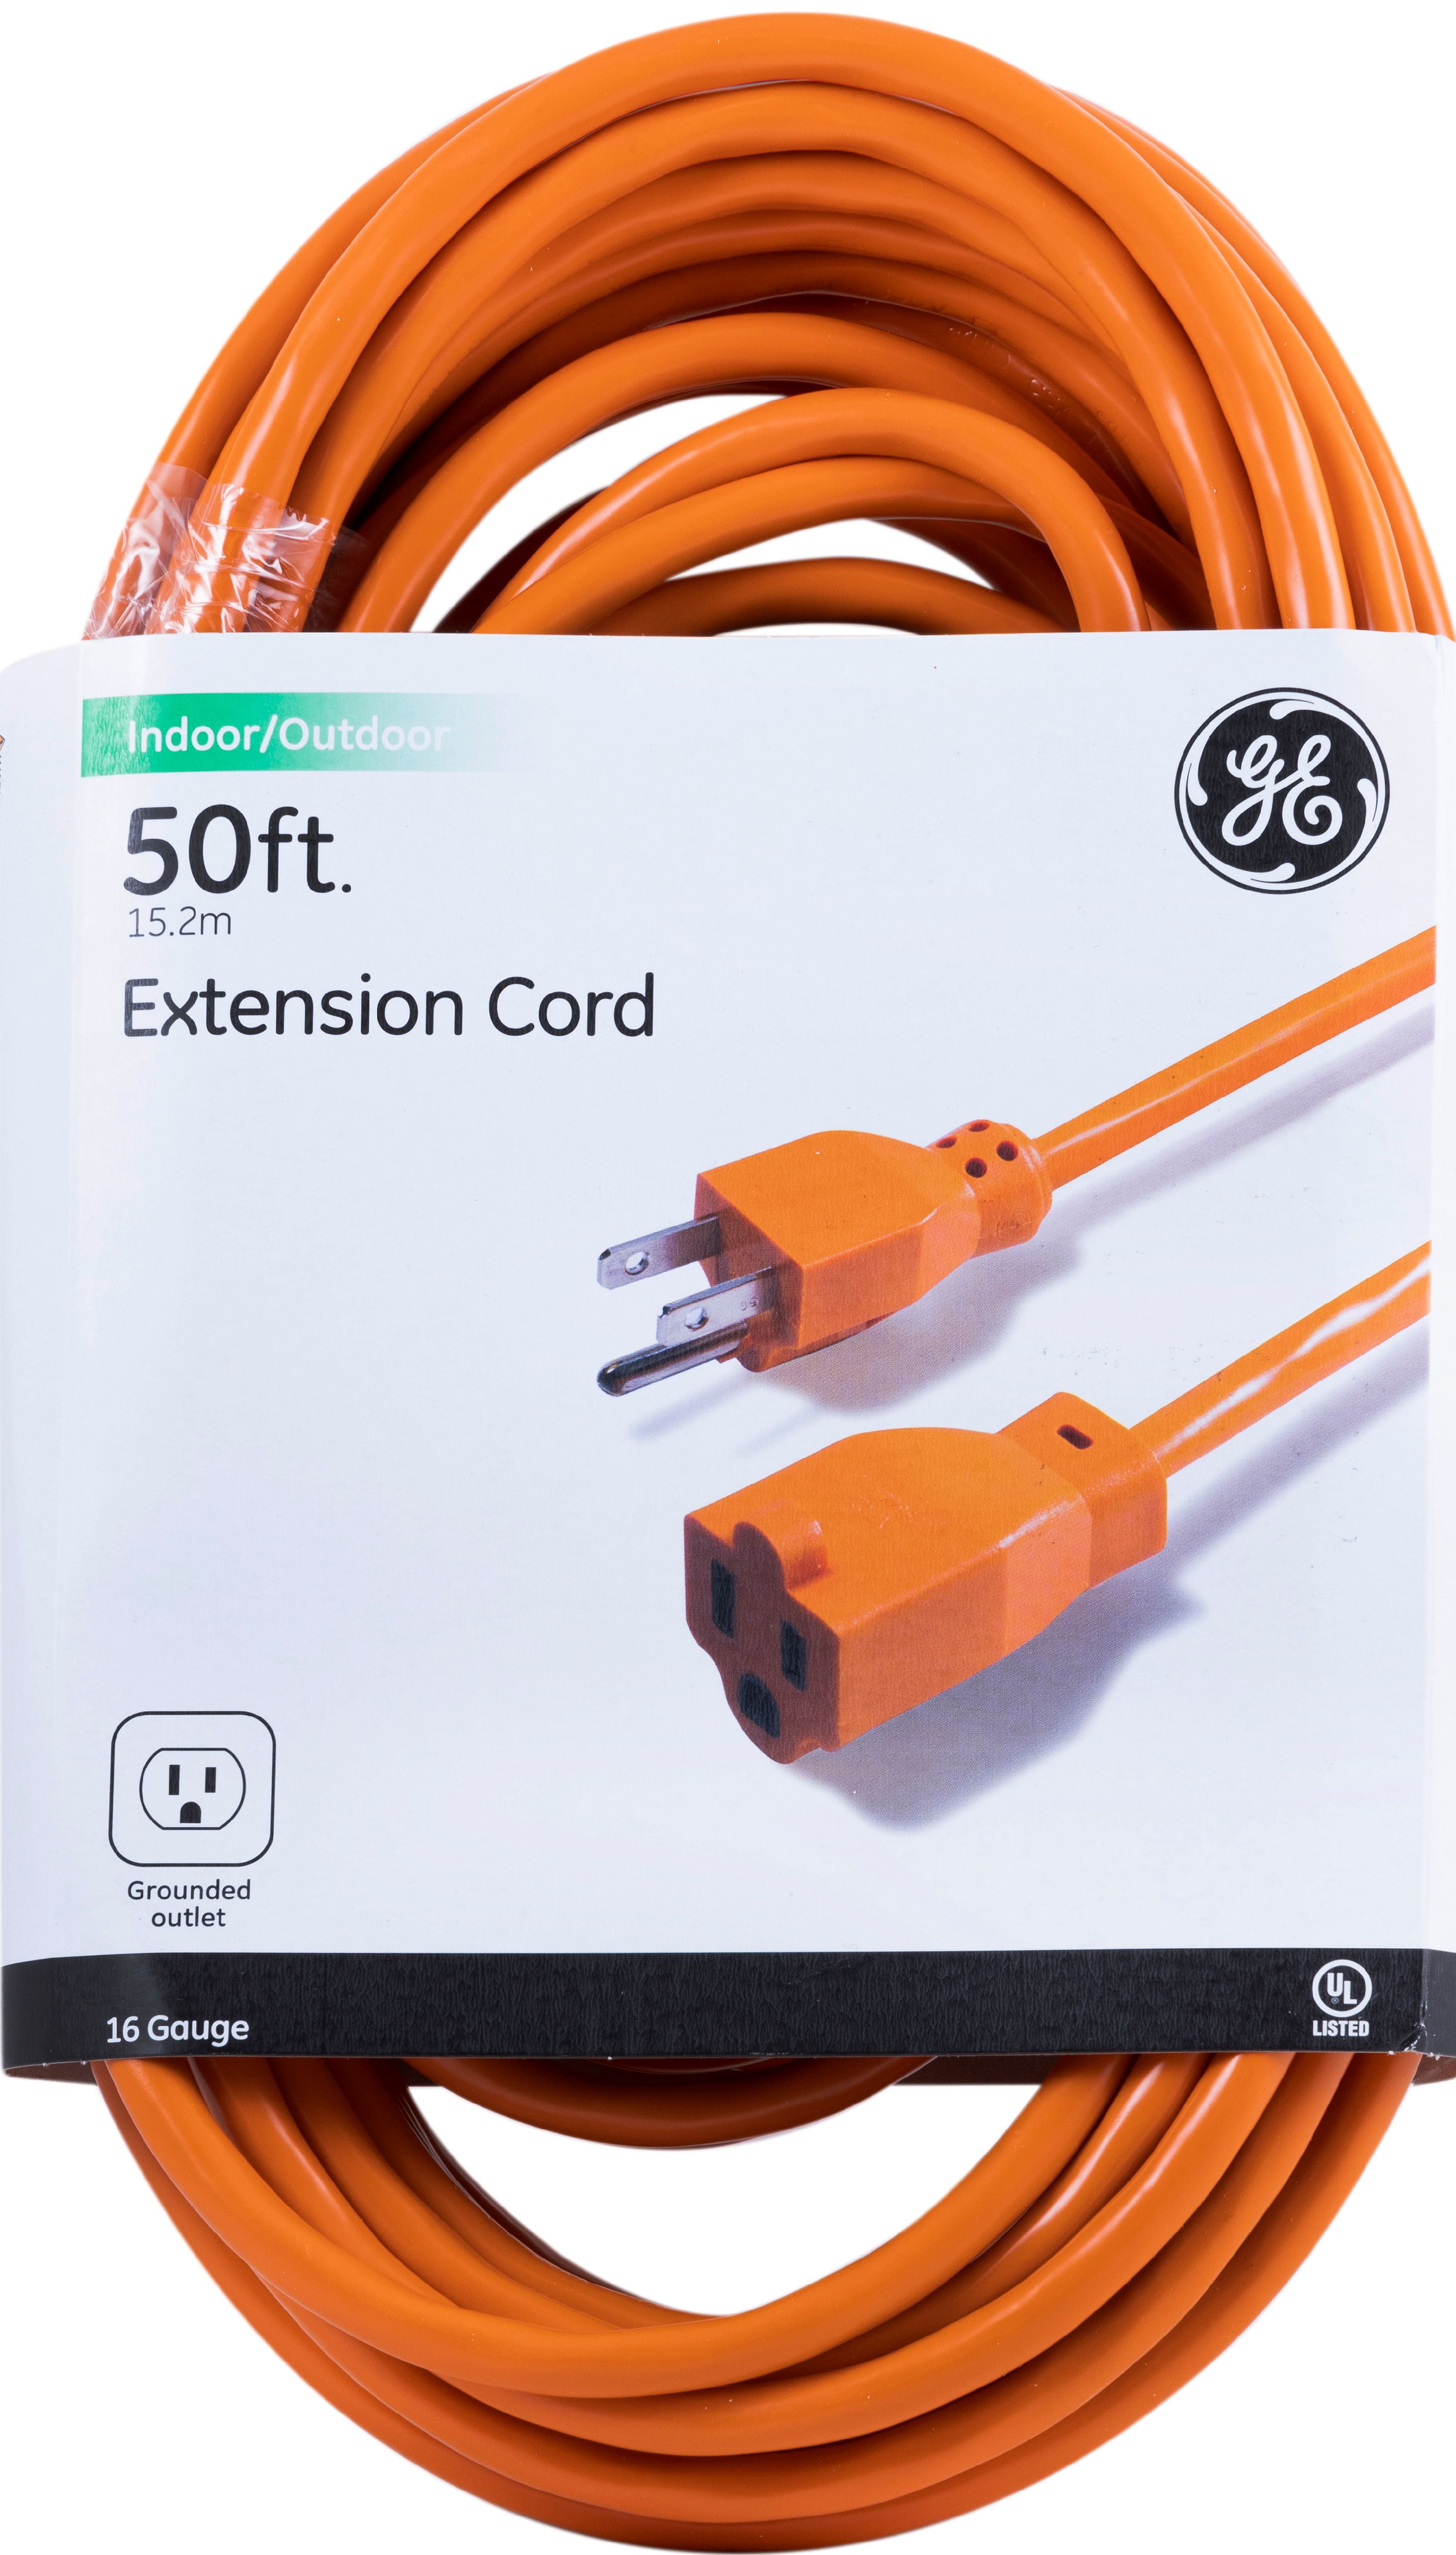 GENERAL ELECTRIC UltraPro Grounded Extension Cord, 50ft. Outdoor, Orange, 16 -Gauge – 51926 